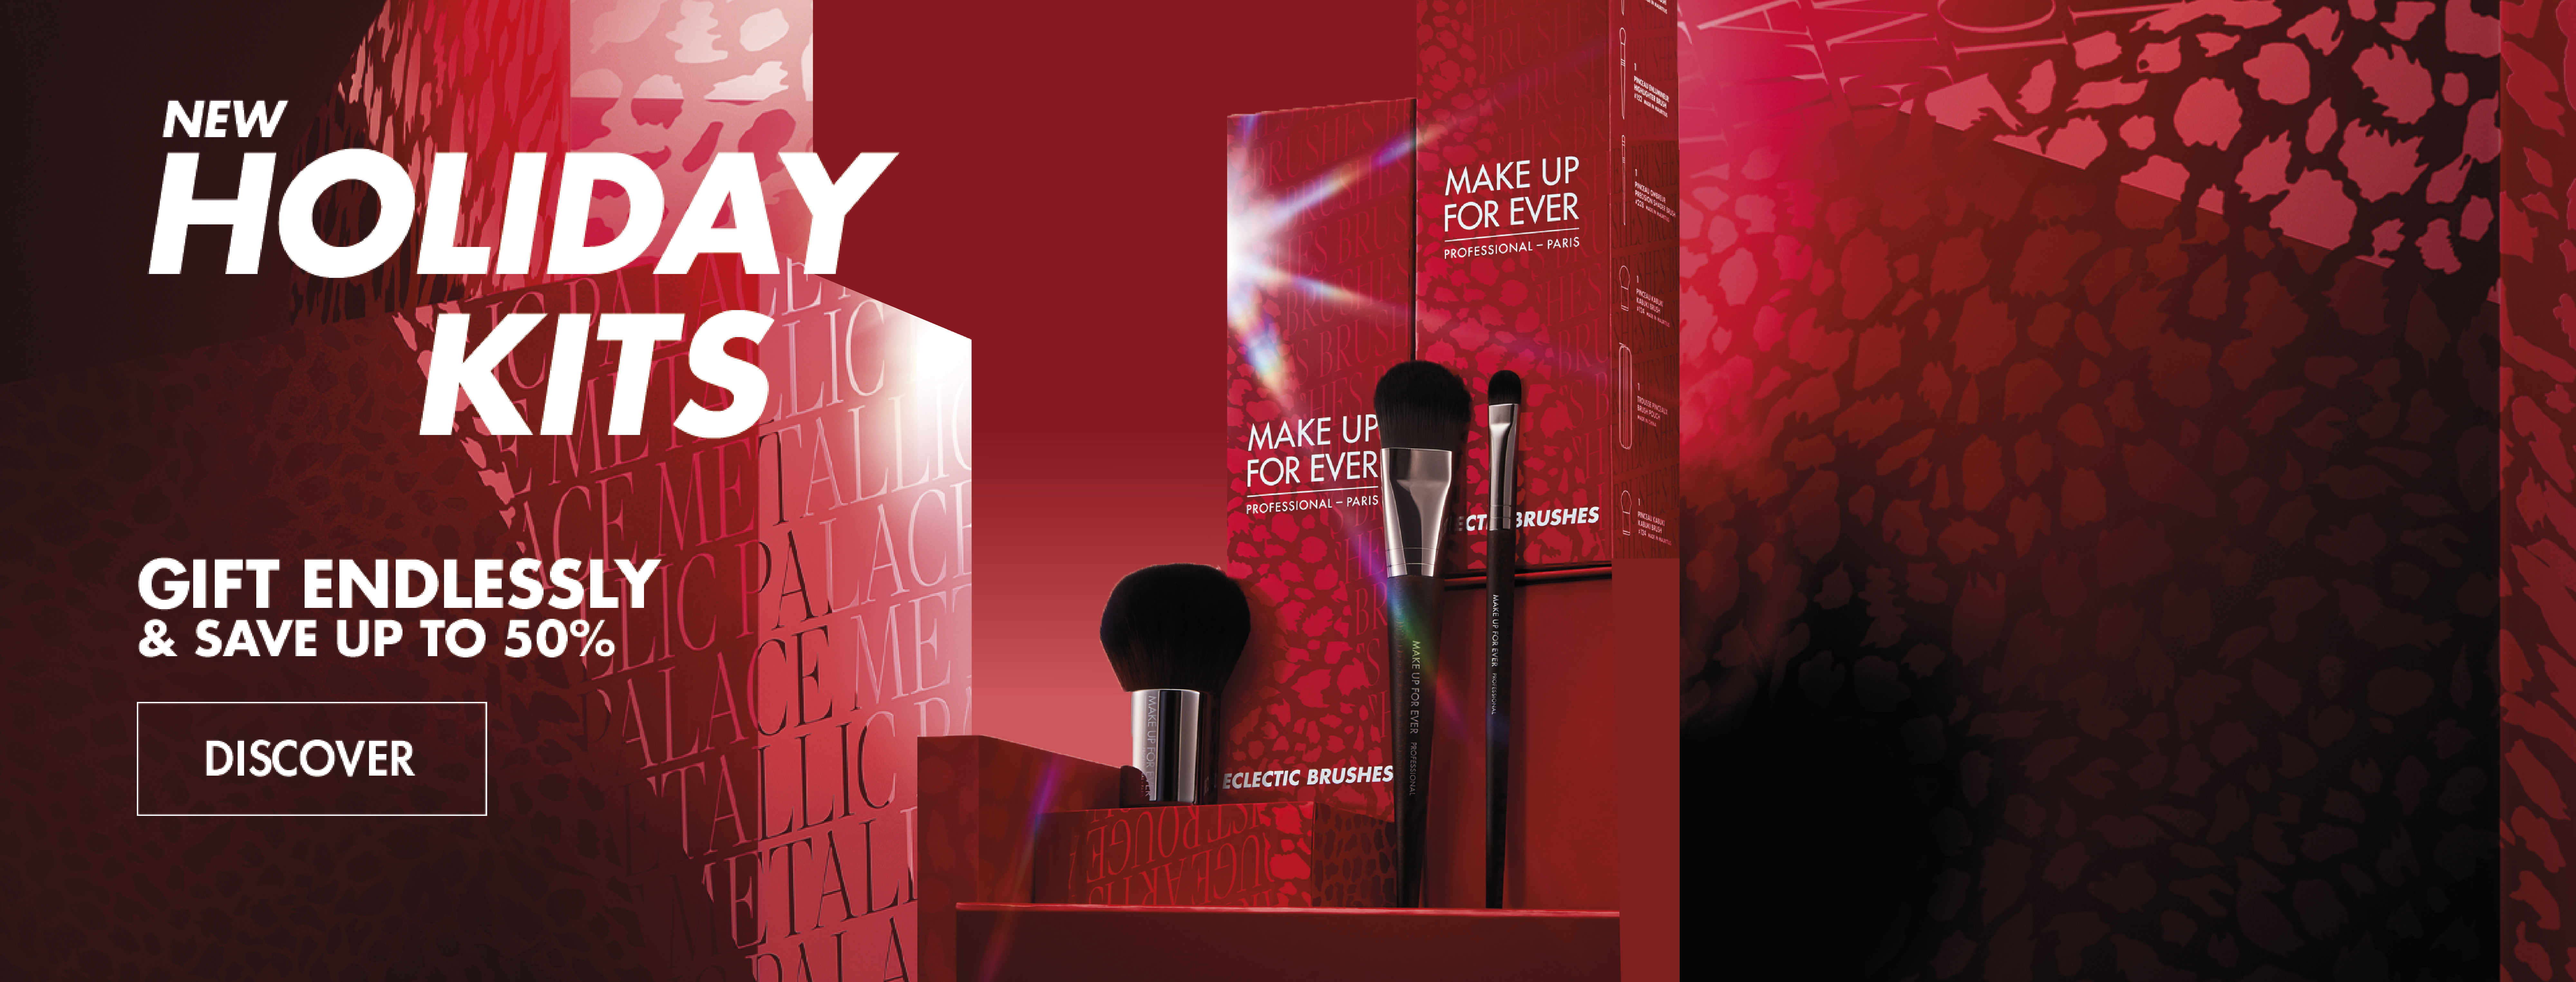 MAKE UP FOR EVER HOLIDAY COLLECTION 2021